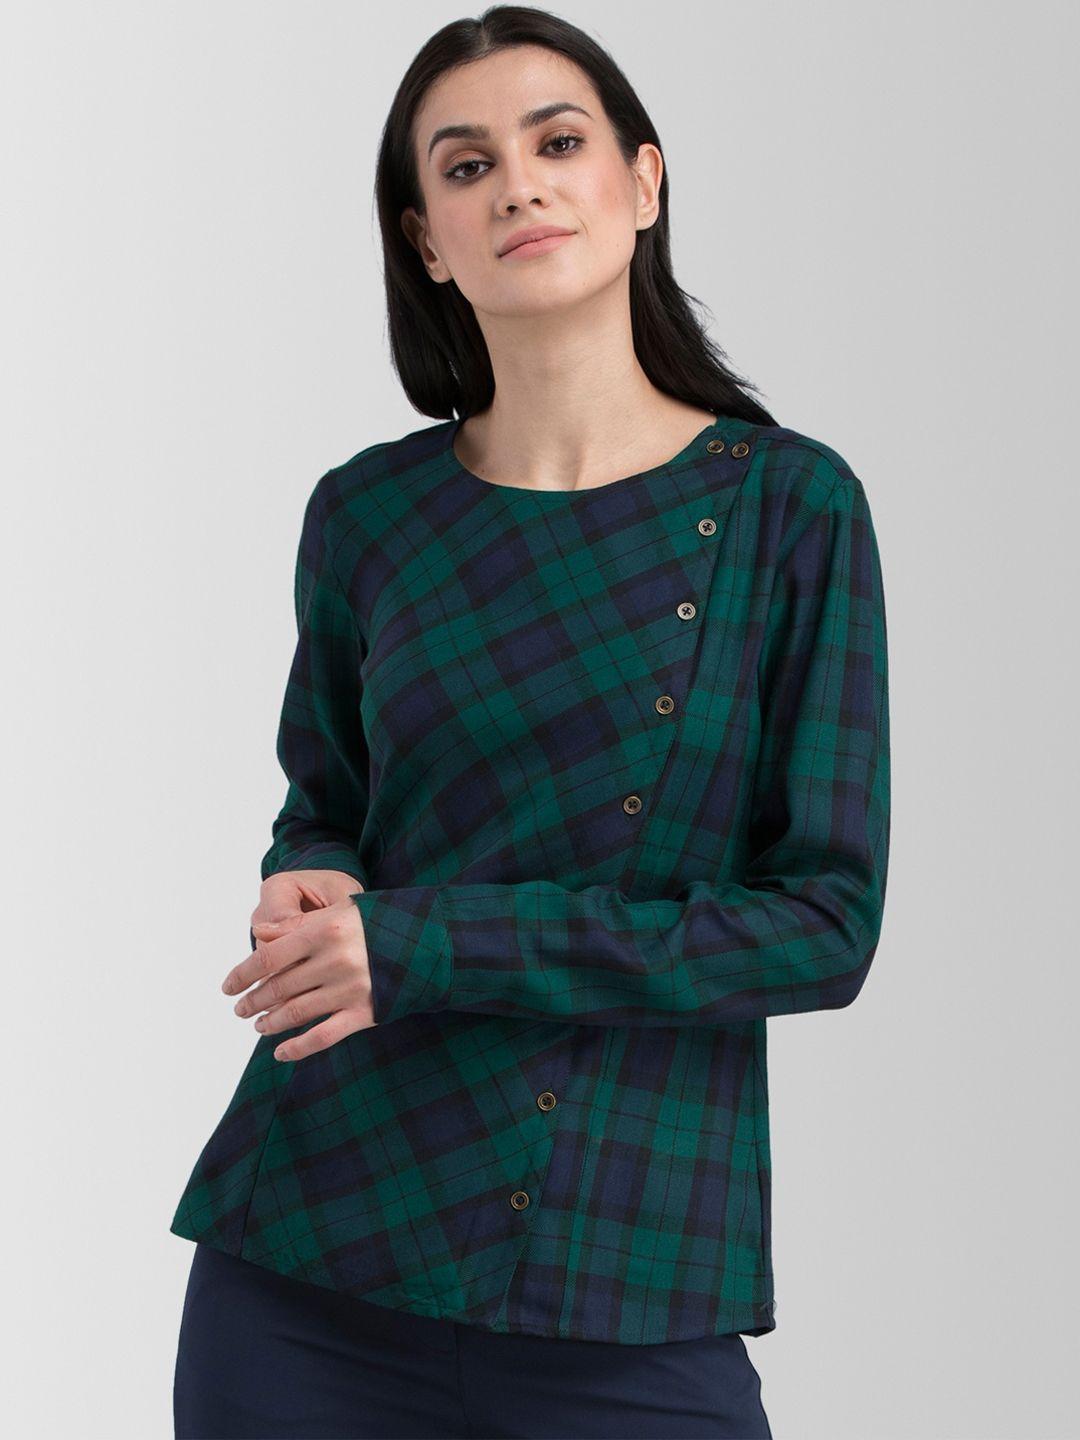 fablestreet women green & navy blue checked top